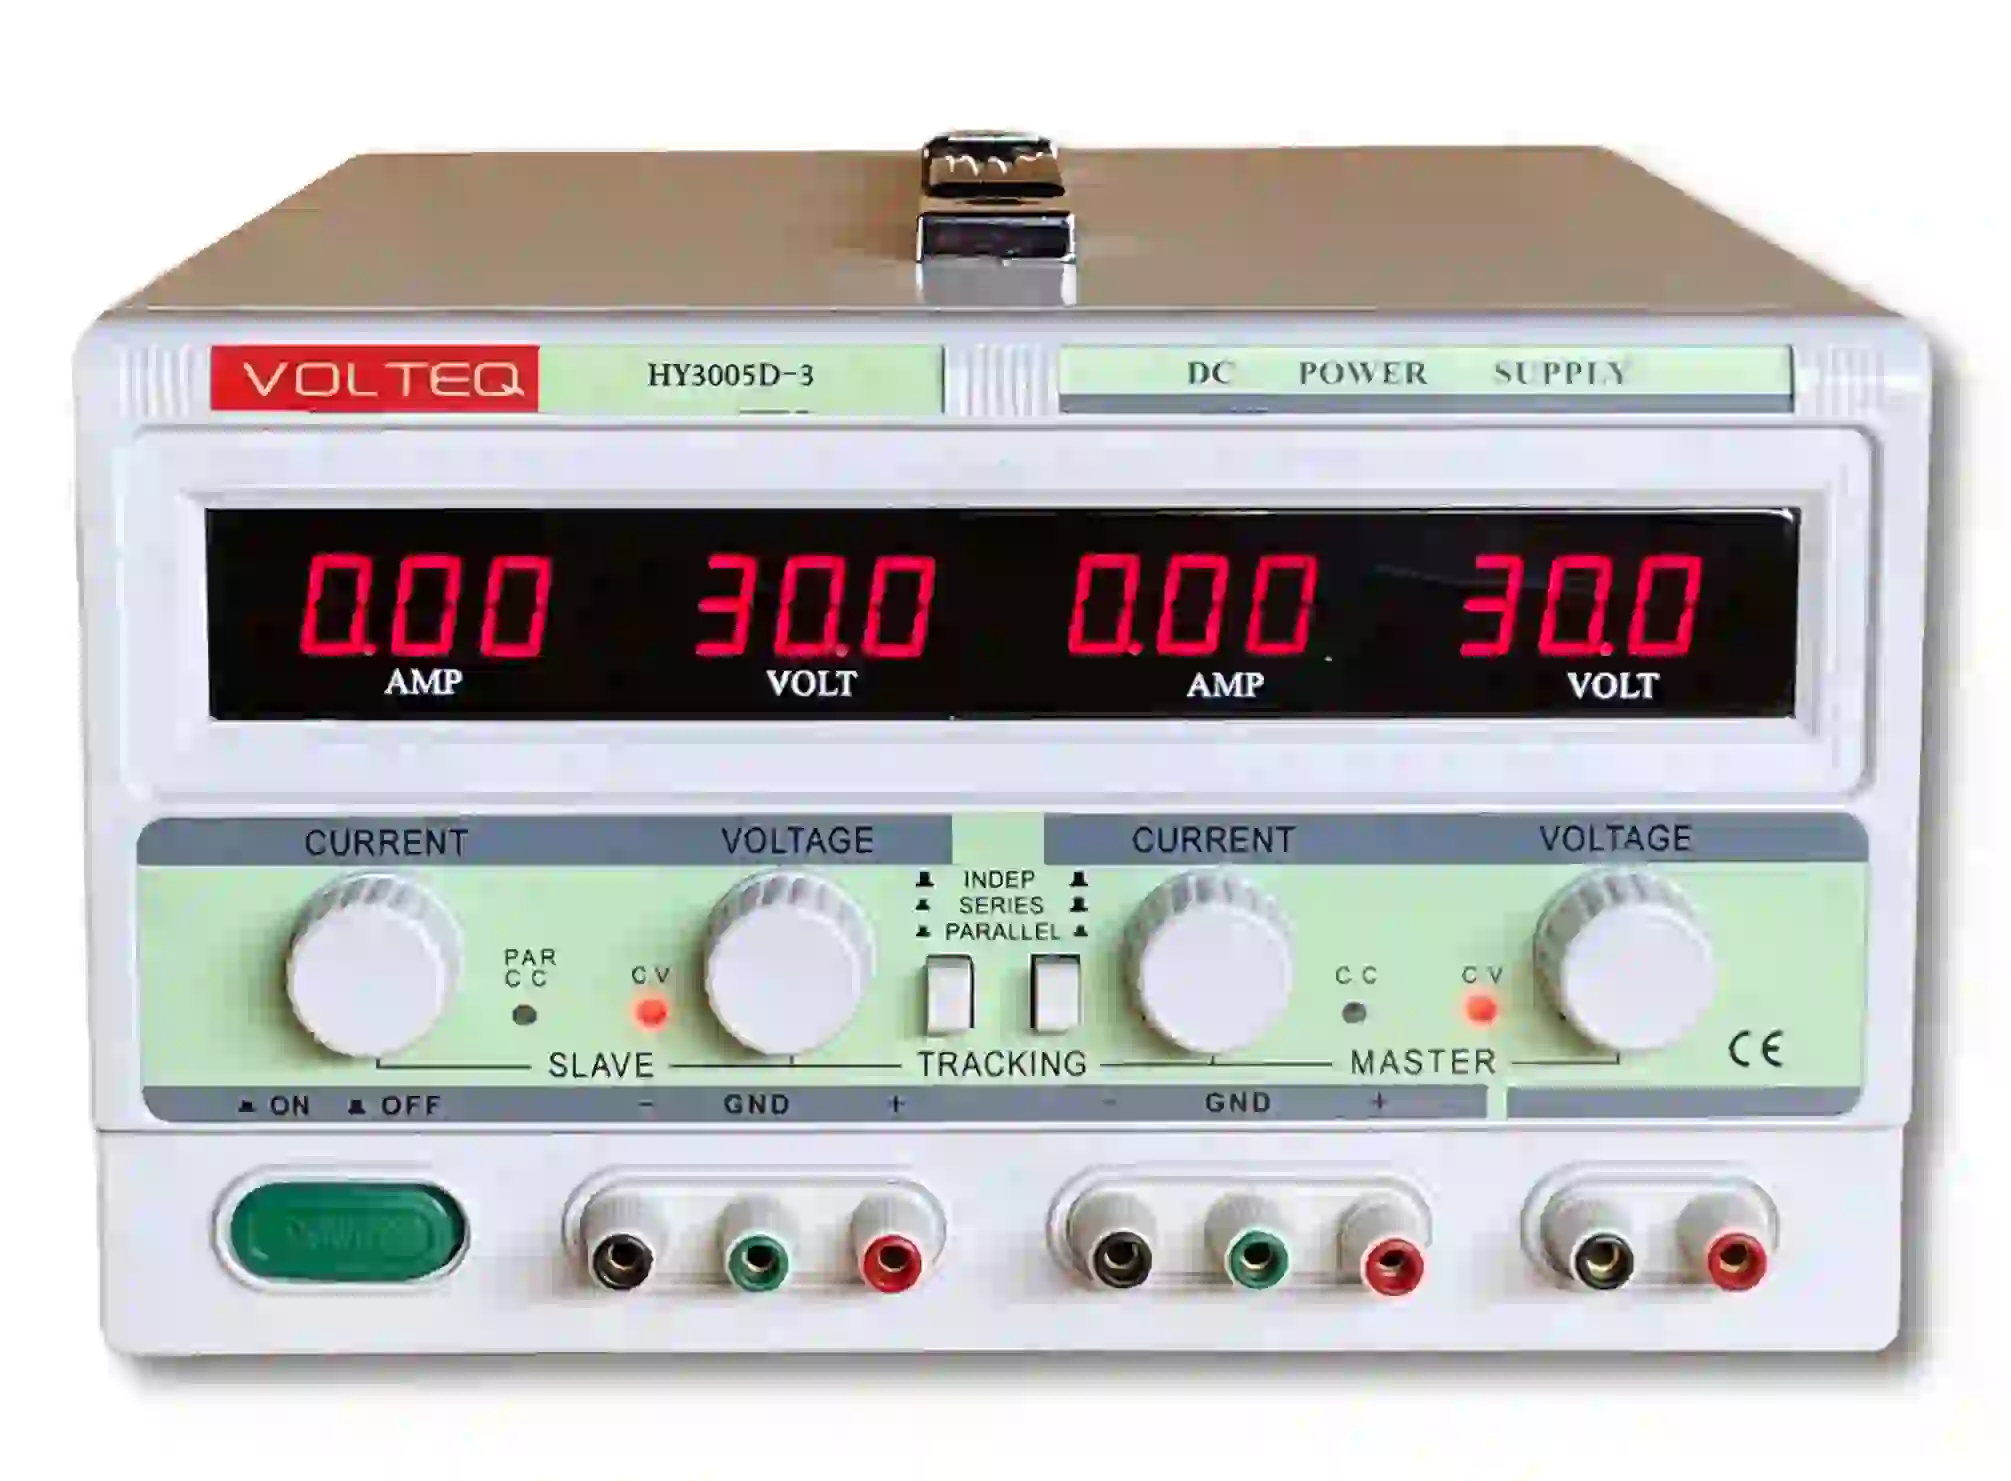 30V 5A Reliable triple output regulated power supply Volteq